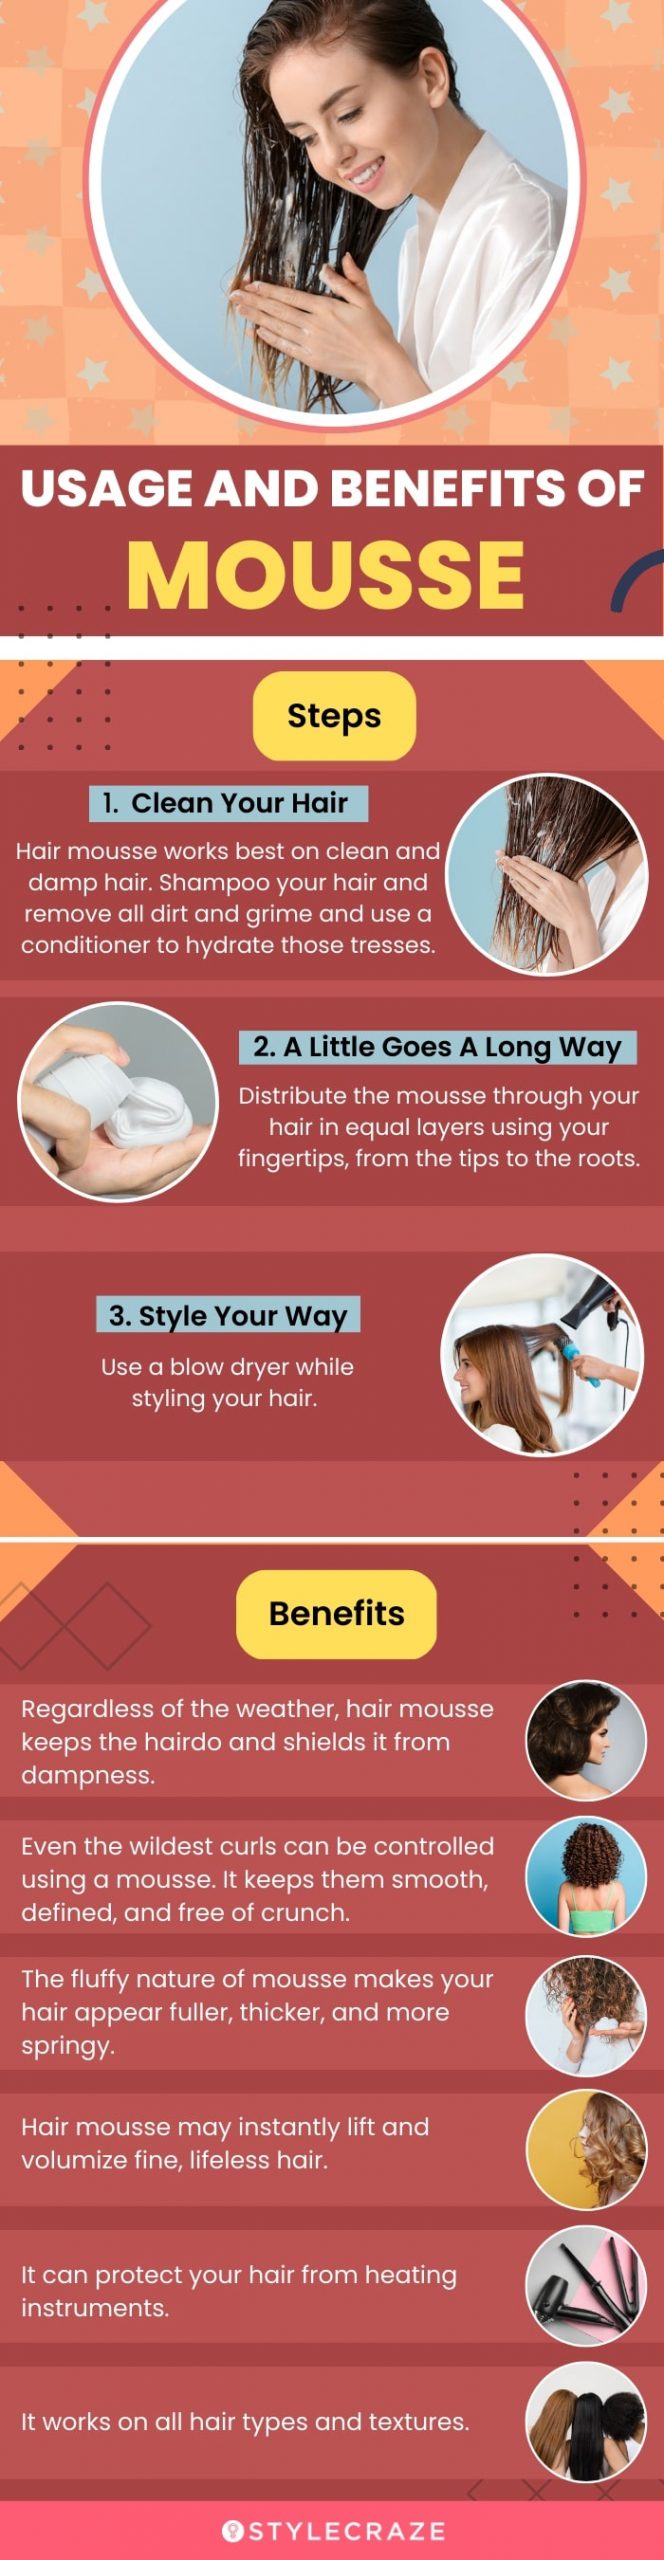 usage and benefits of mousse (infographic)